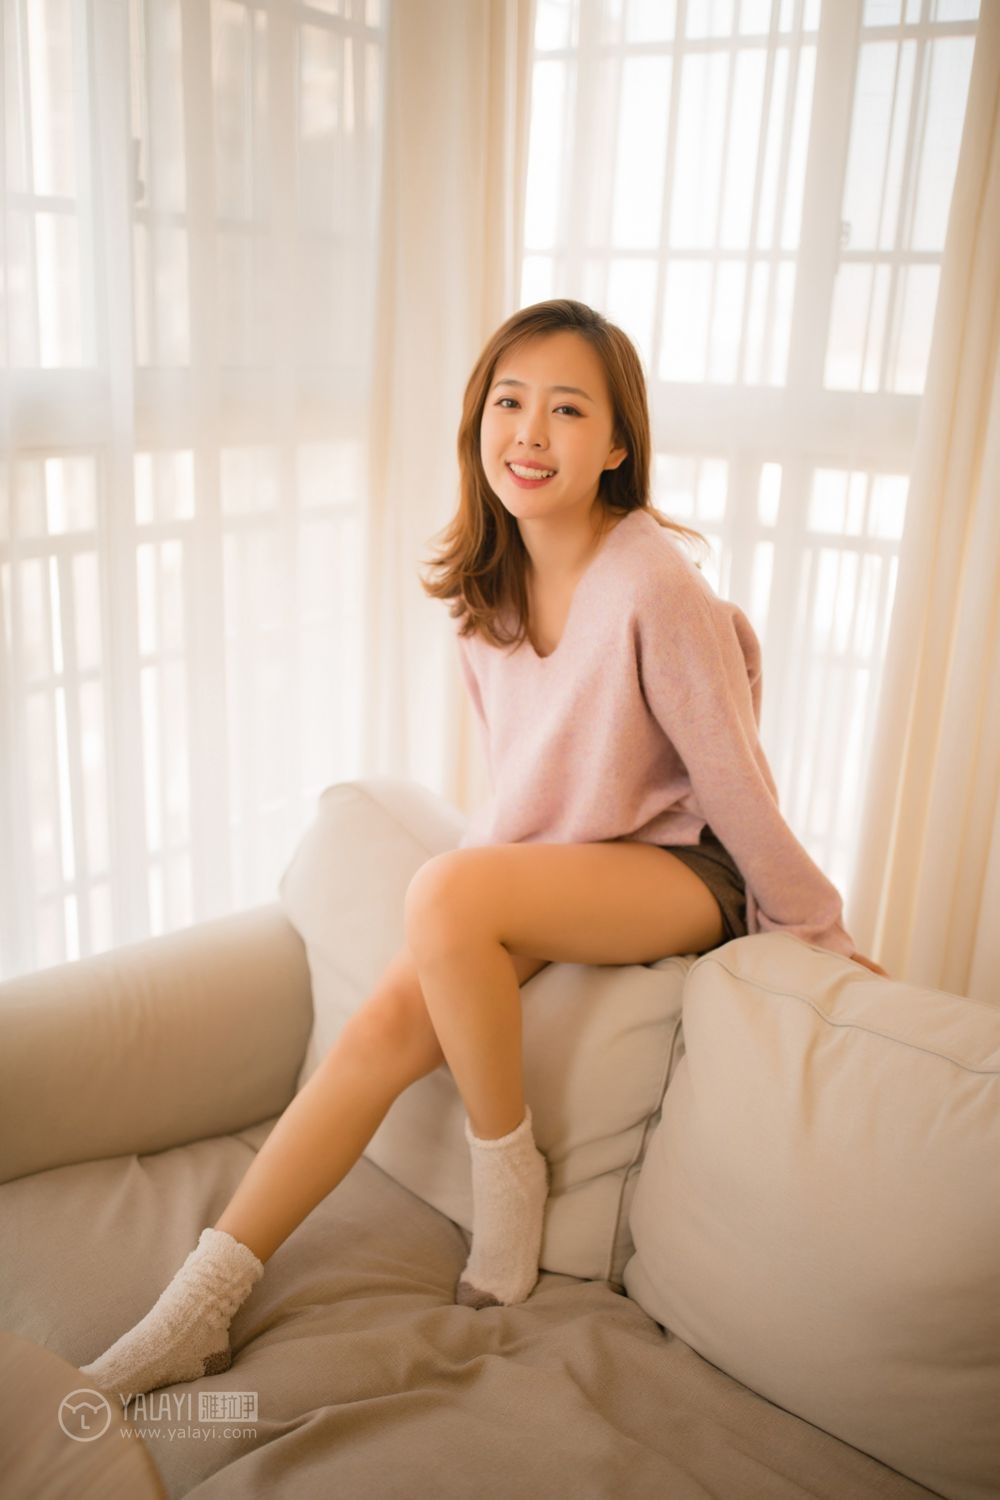 Young girl 26 years old beautiful tenant smiling sexy legs dynamic private portrait(2)